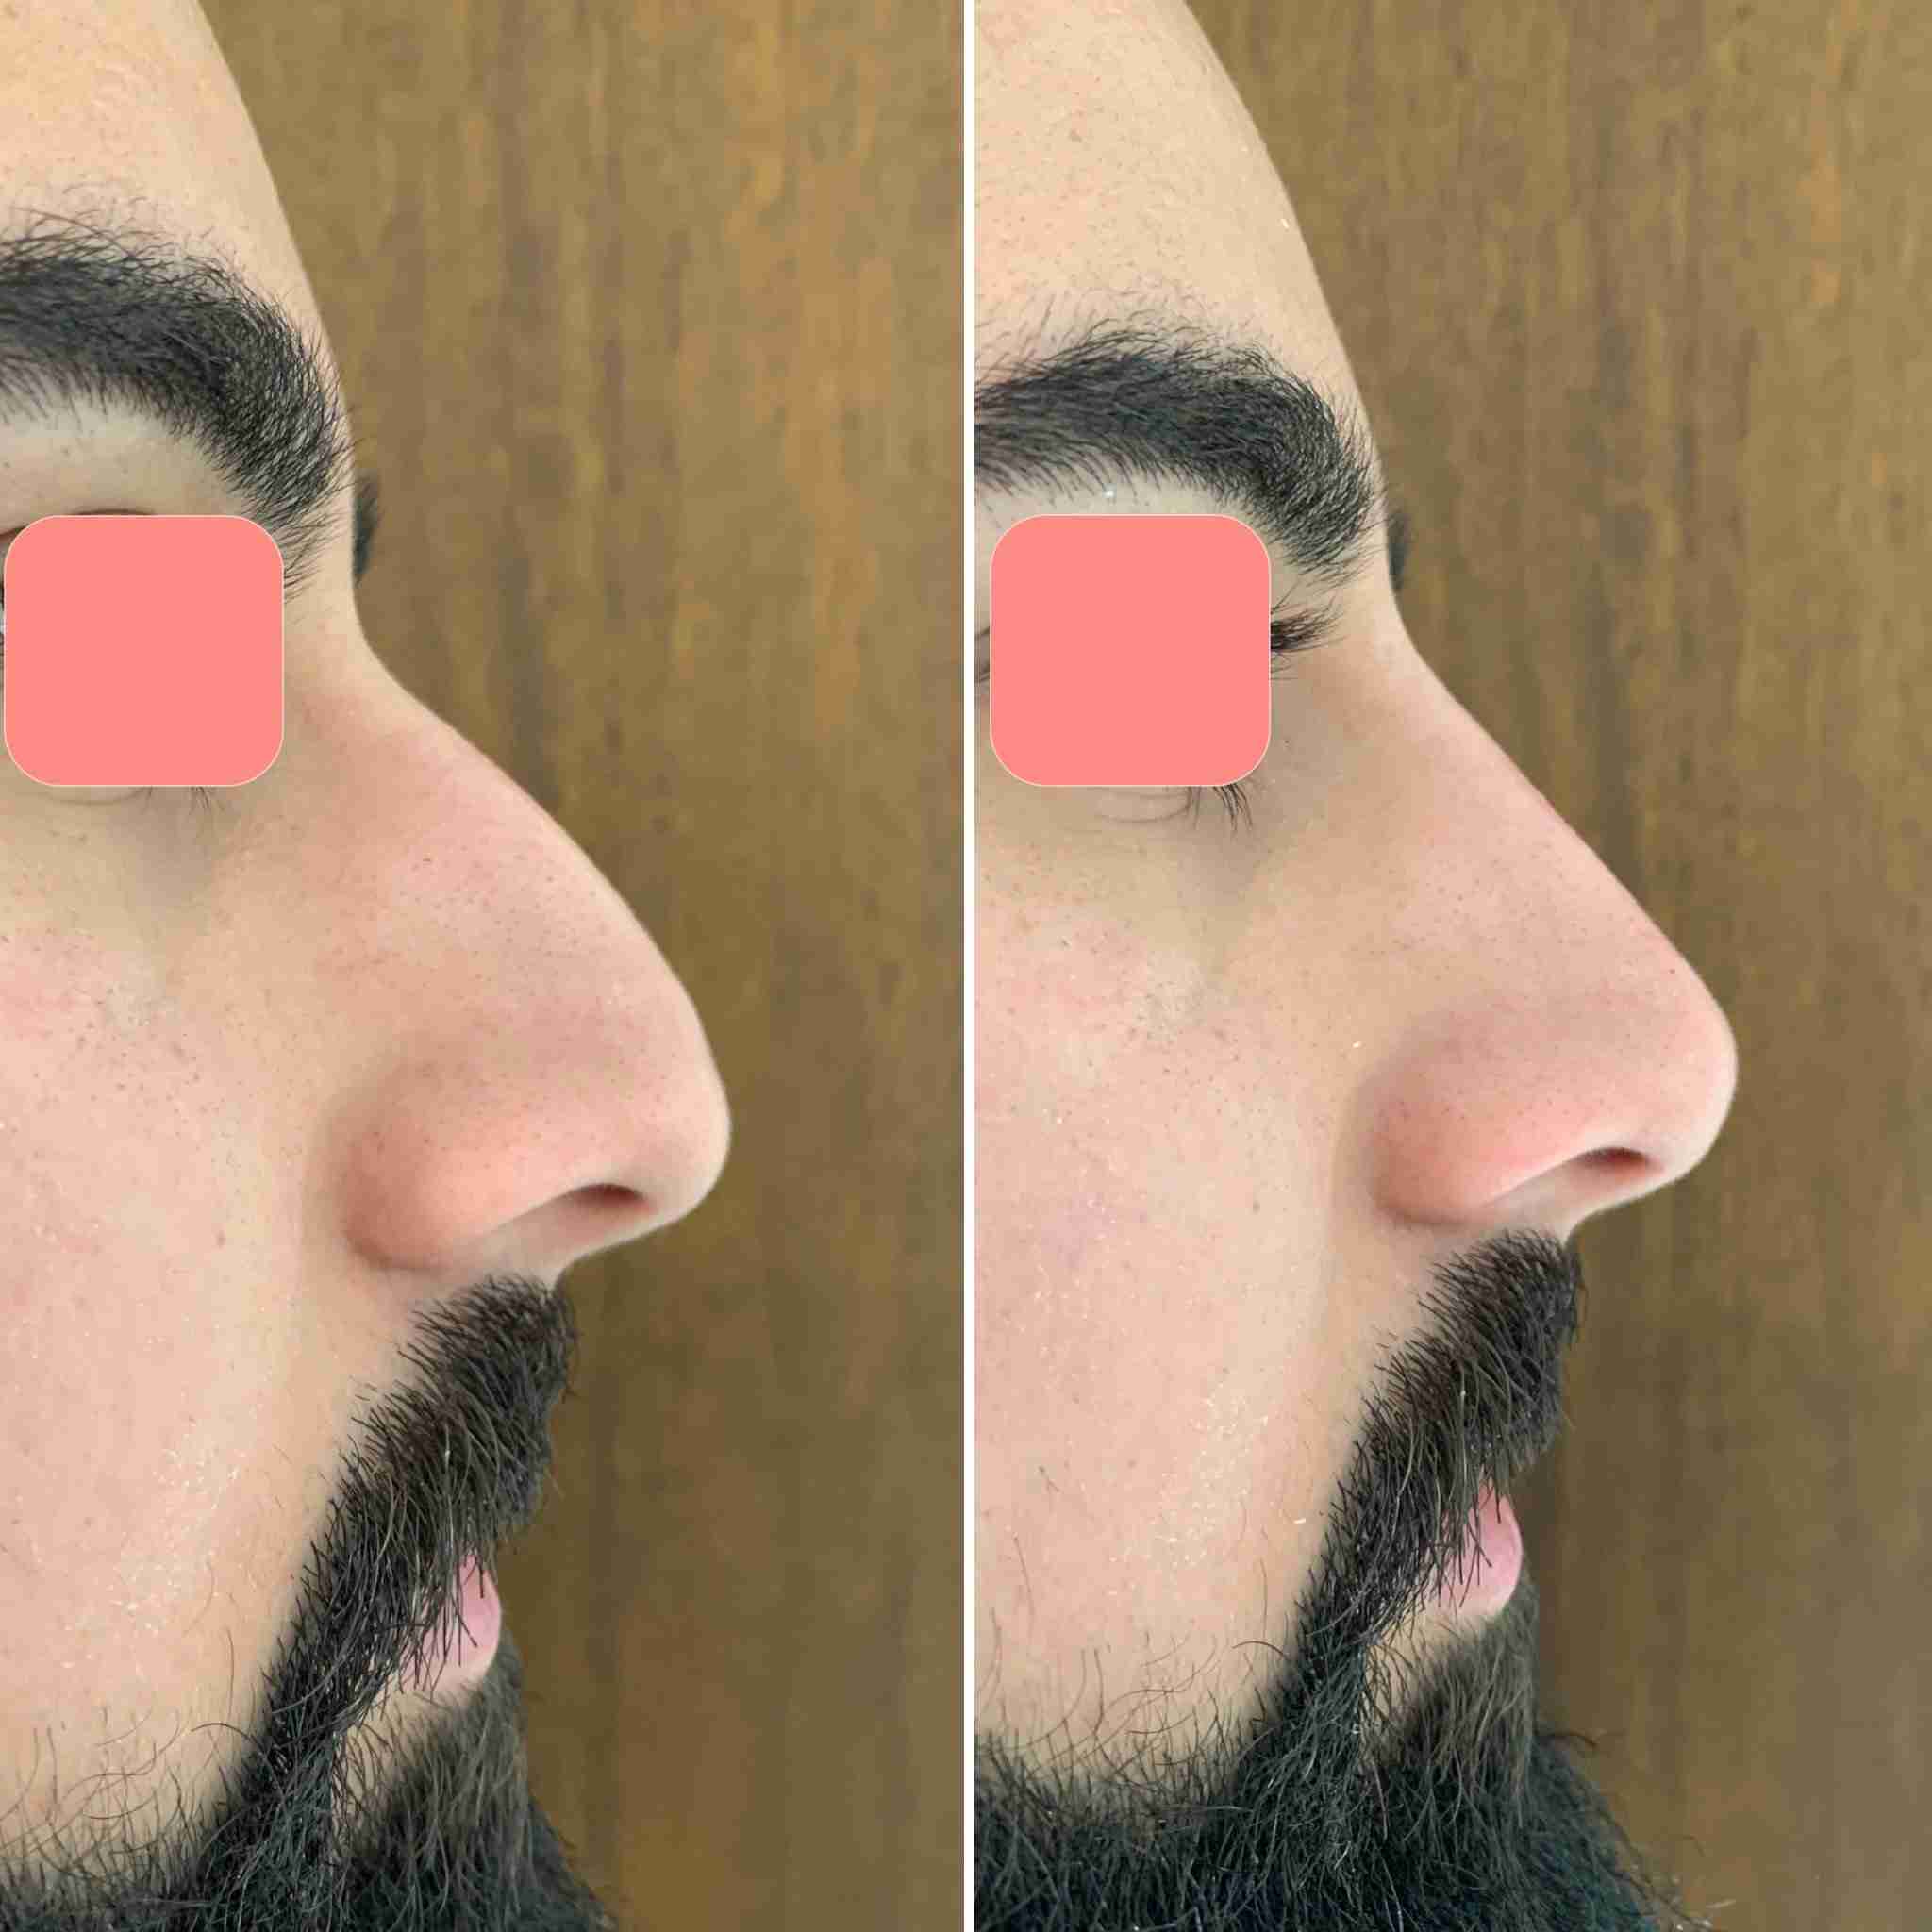 Male non-surgical rhinoplasty